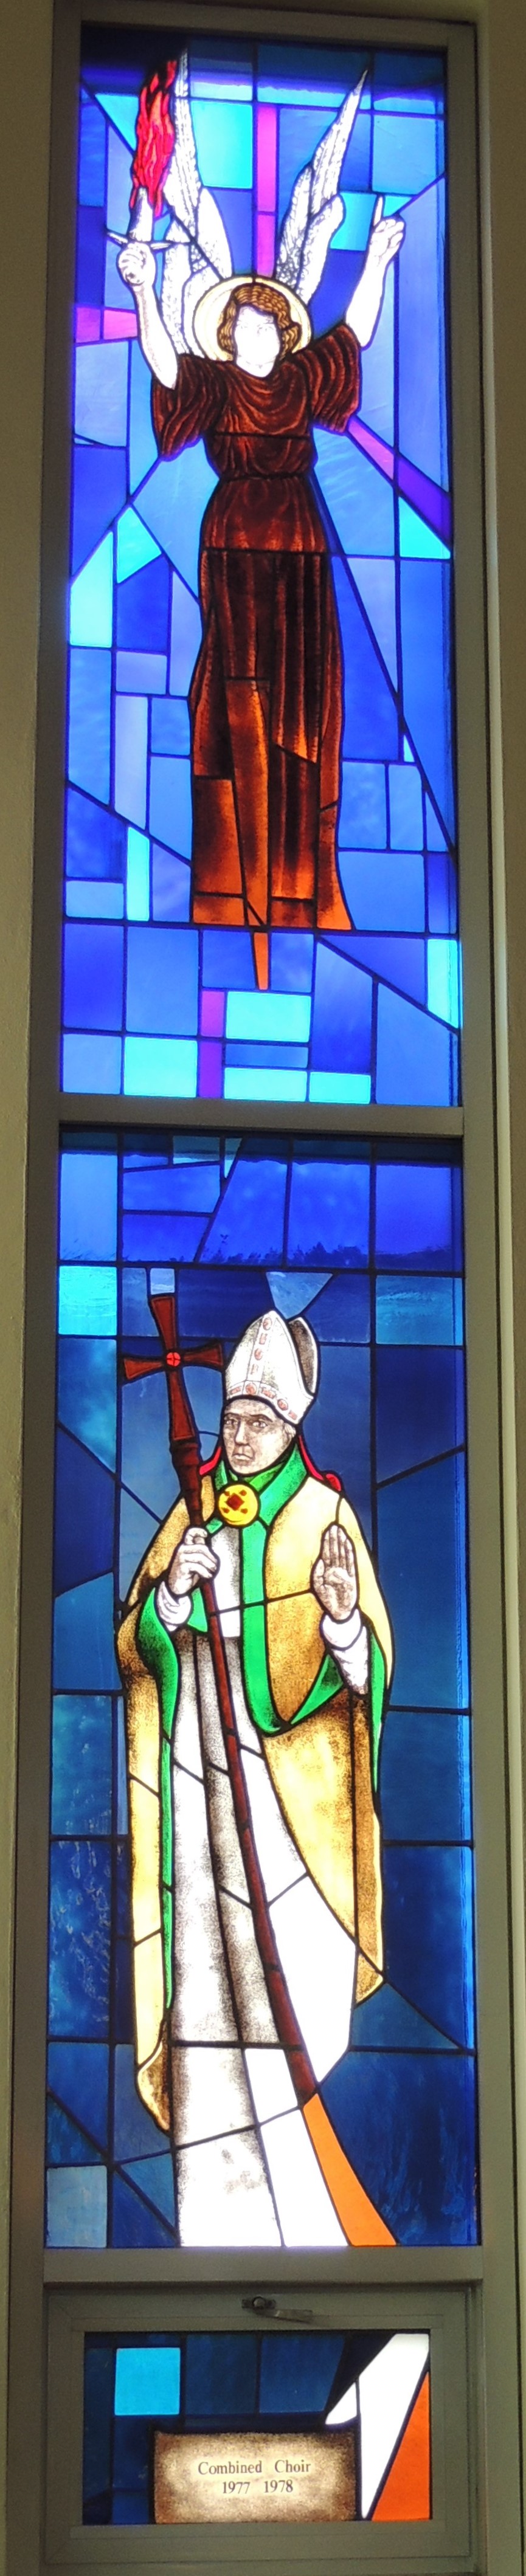 Cardinal Philip Pocock and angel - stained glass window